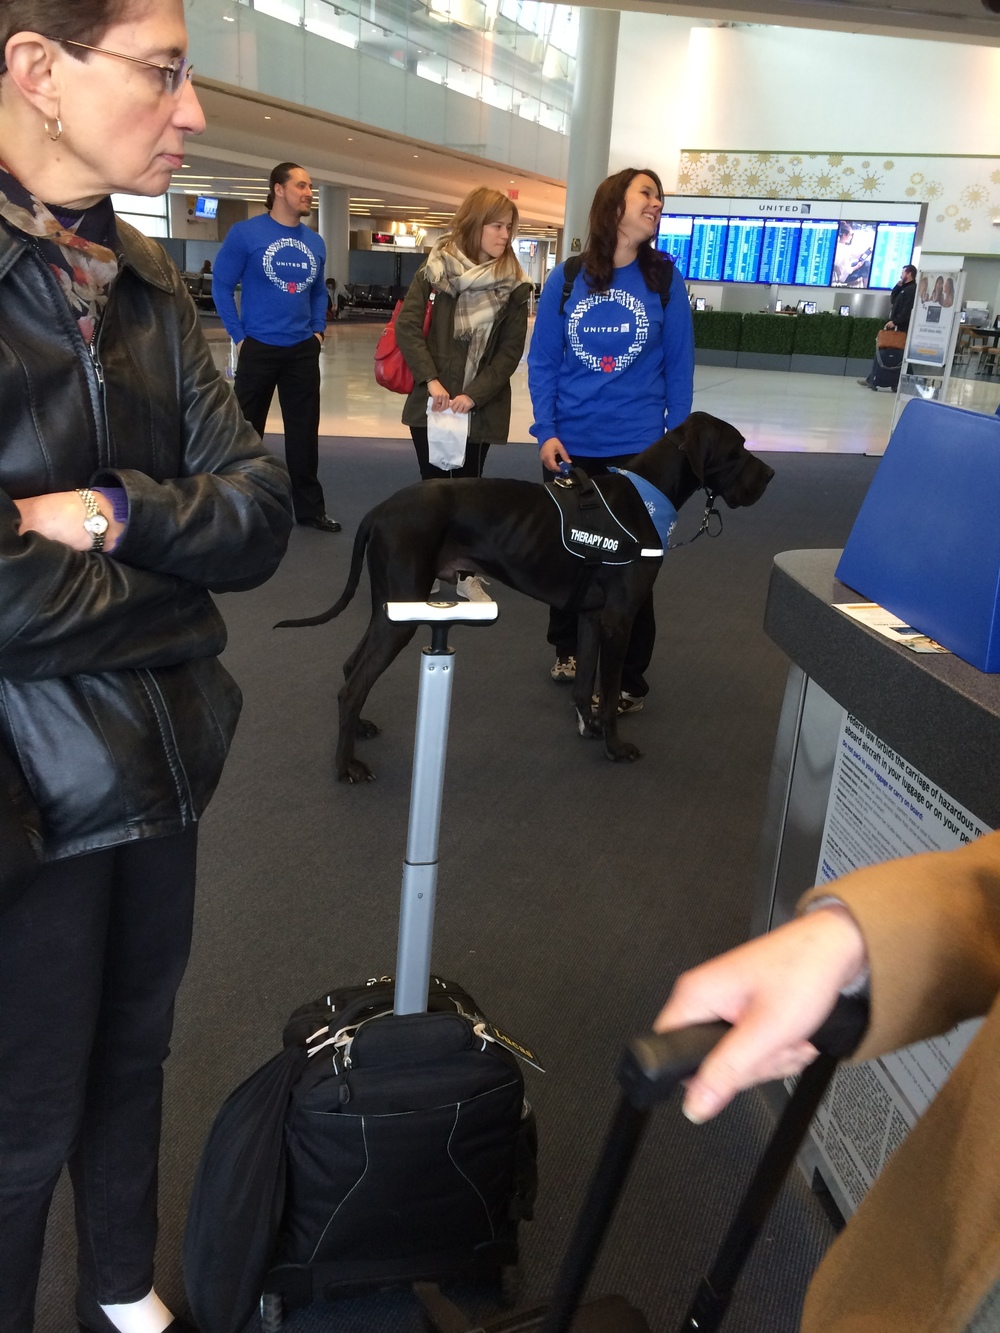 United bringing therapy dogs so we can cope with their delays